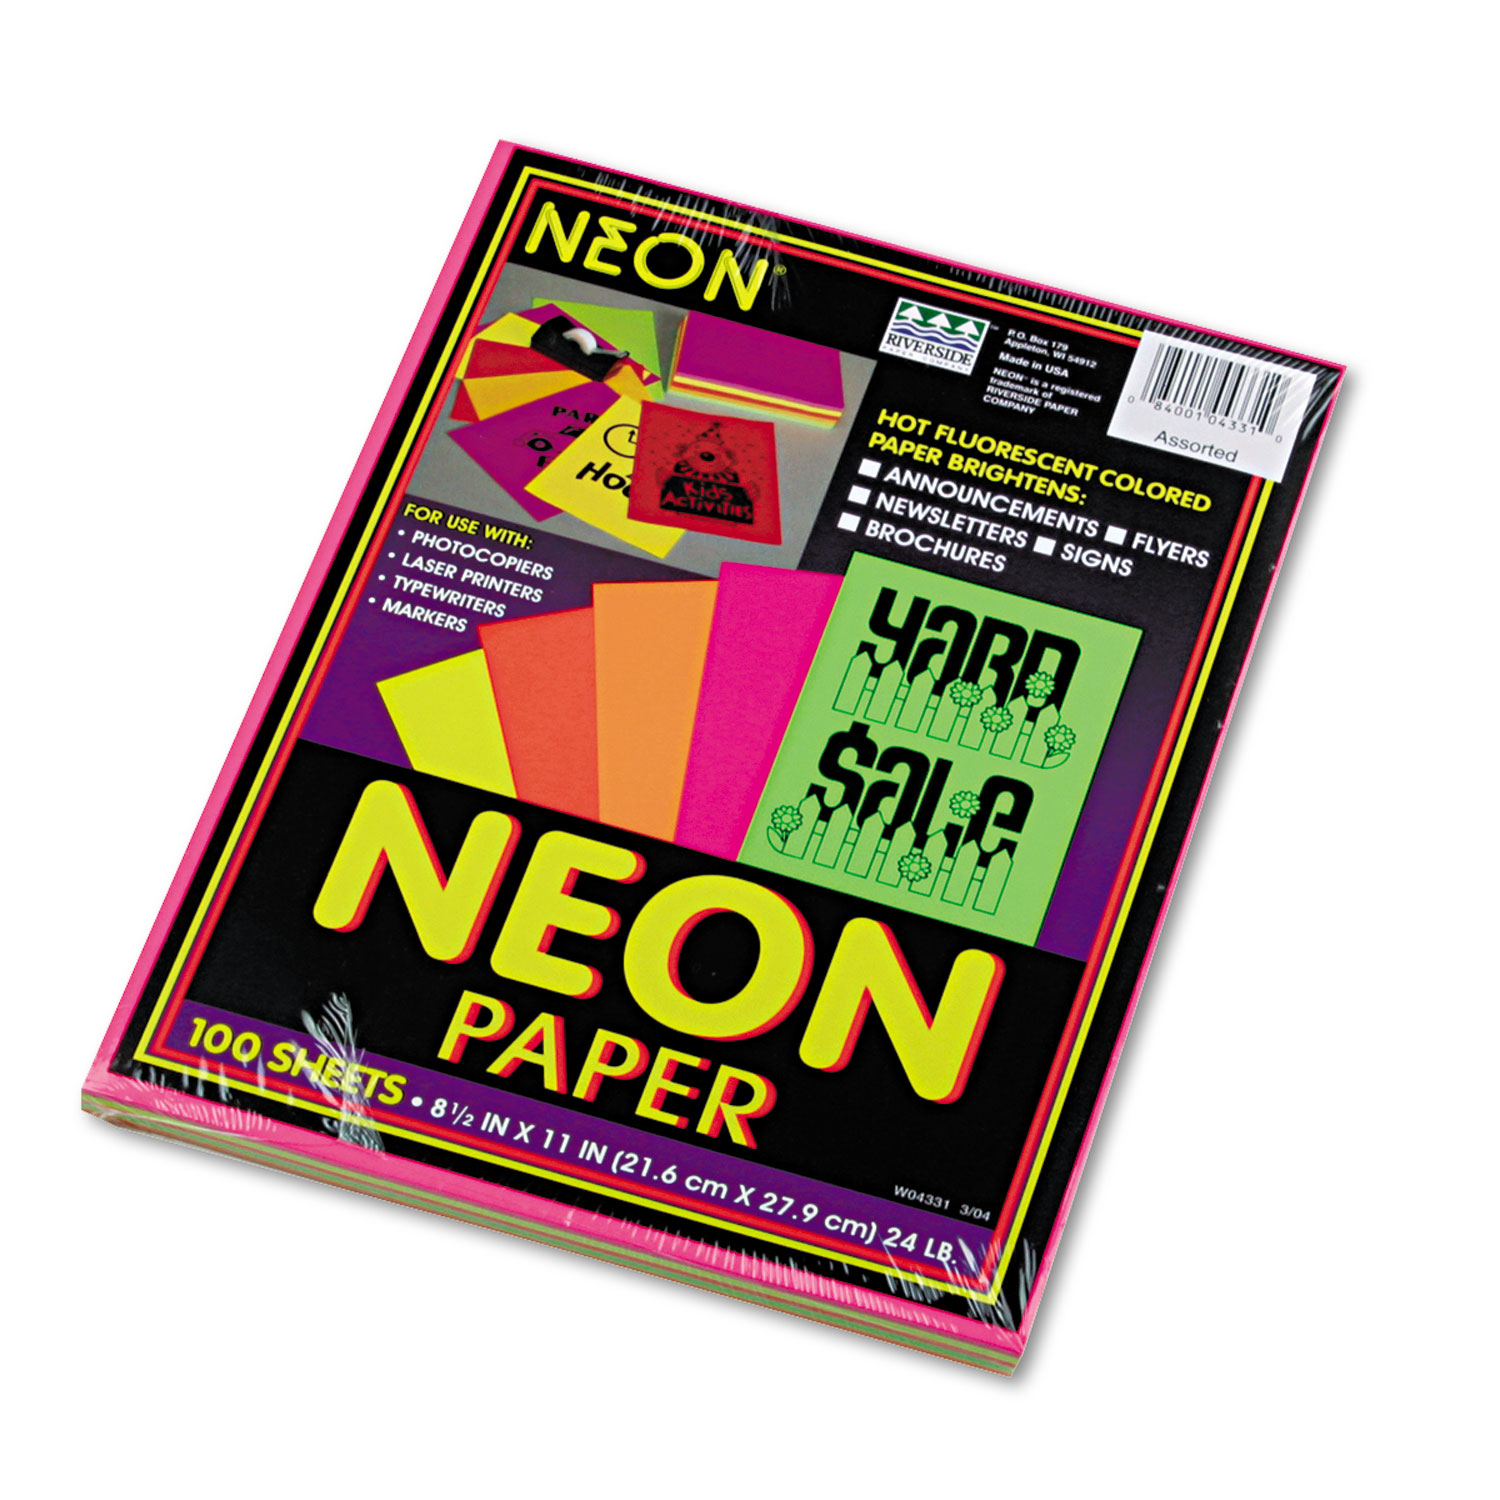 Neon Paper for Signs and Flyers